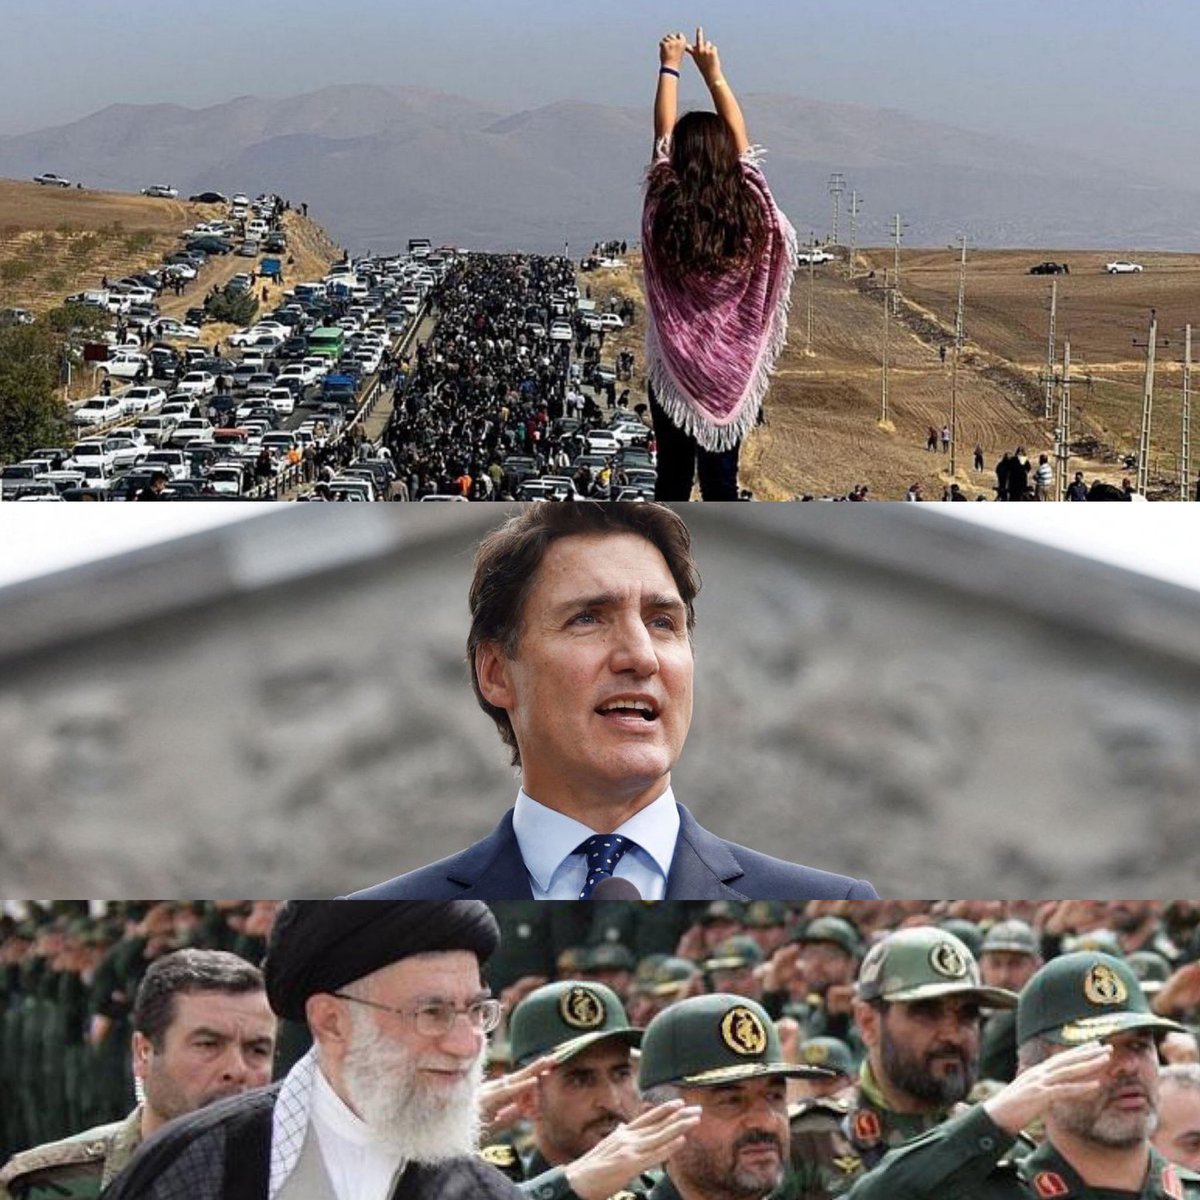 Justin Trudeau: Which Side of History Will You Choose?
The people or the terrorists? 
We Iranians welcome the Canadian Parliament’s historic decision to designate the Revolutionary Guards as a terrorist organization. I hope other parliaments across democracies follow this path.…